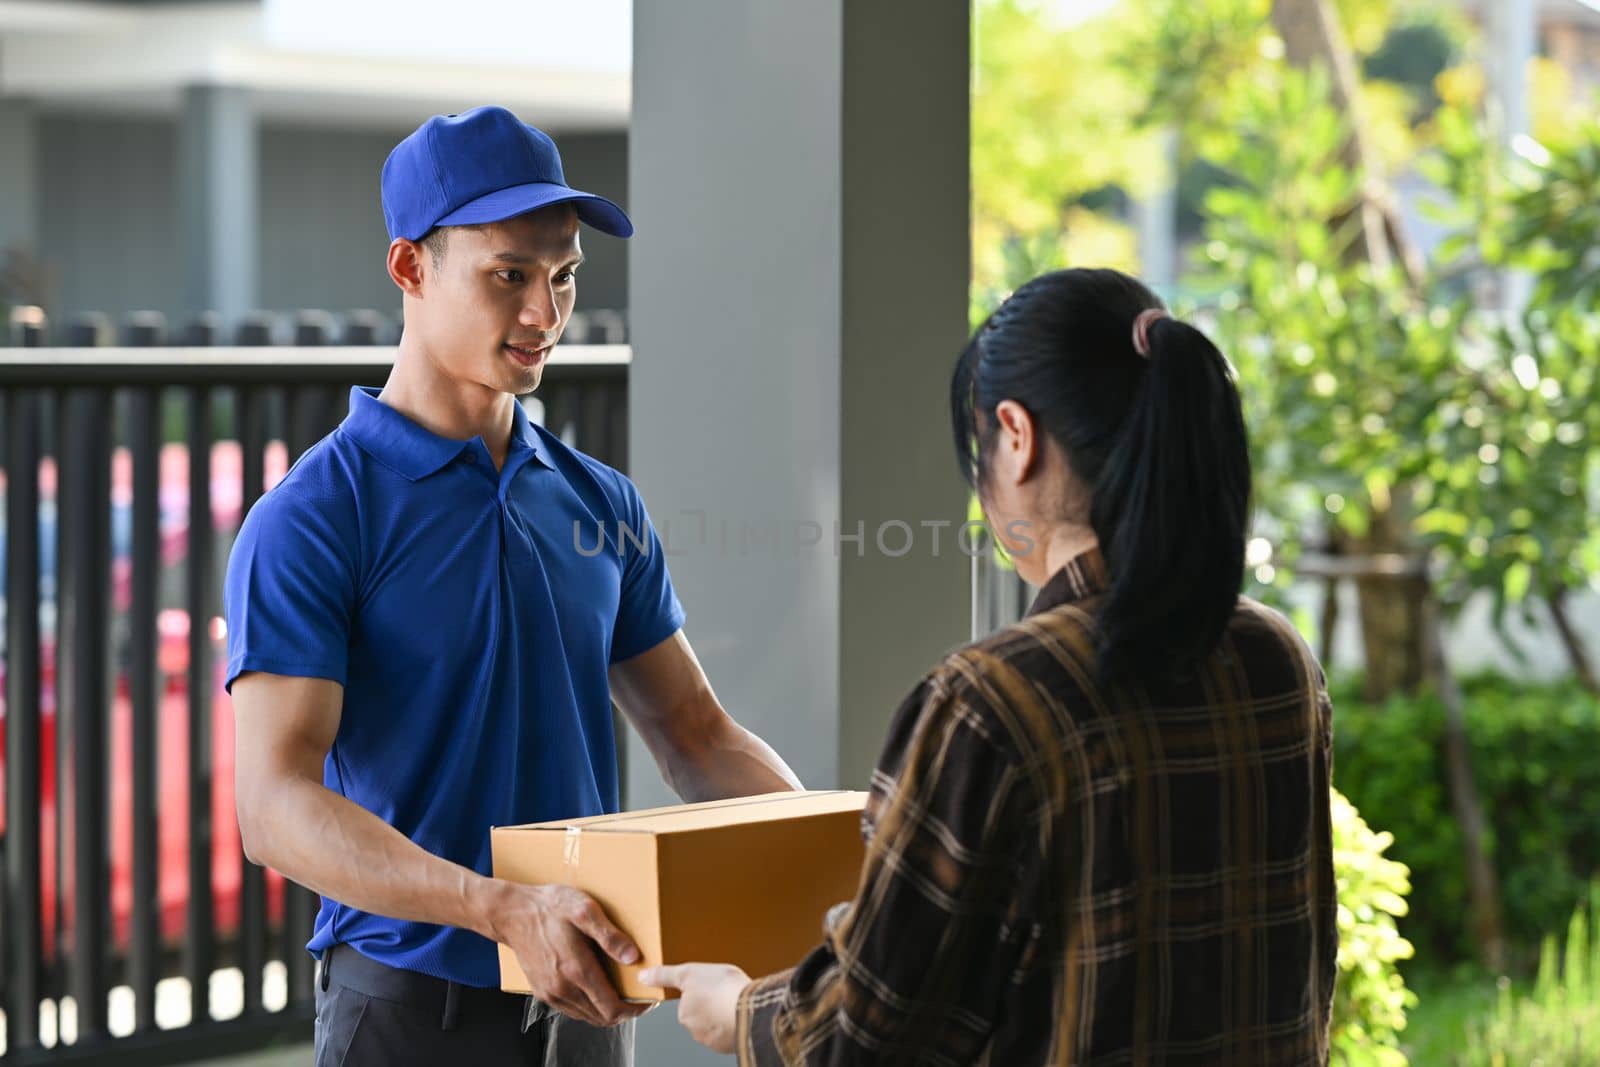 Delivery man giving postal package to customer at doorway. Delivery service, post and shipping concept by prathanchorruangsak